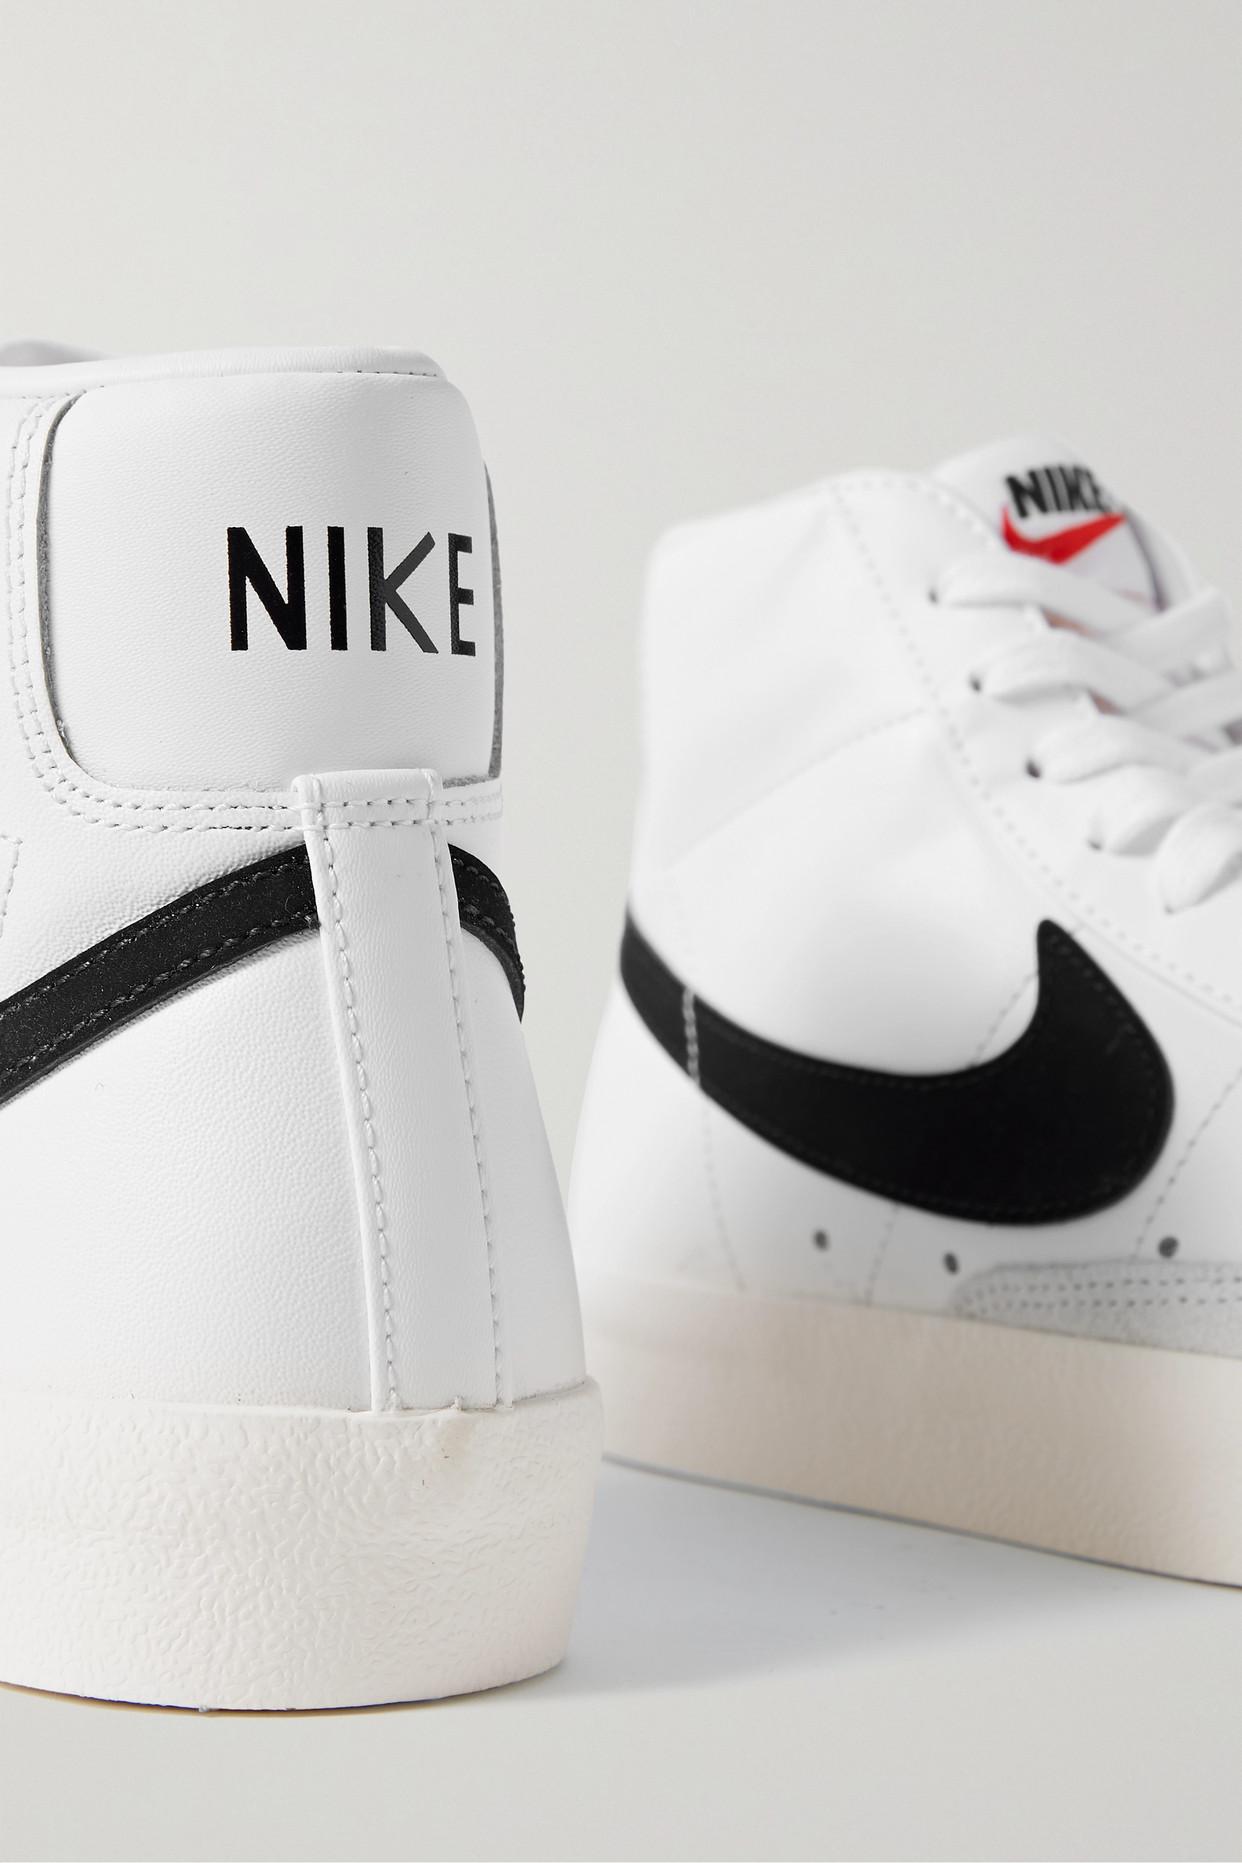 Schepsel parlement hoek Nike Blazer Mid Suede-trimmed Leather High-top Sneakers in White | Lyst